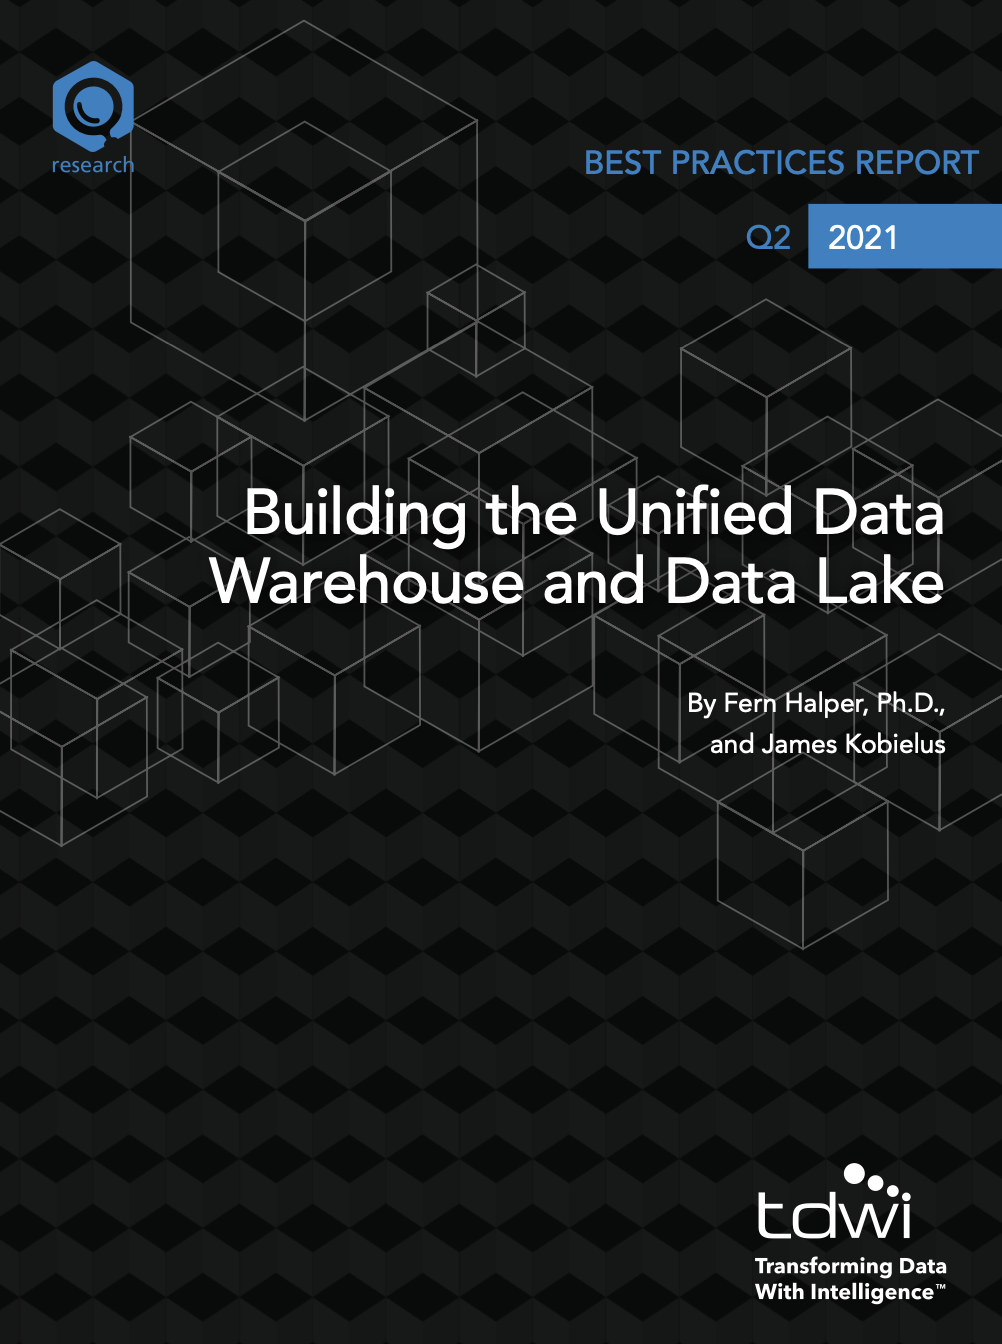 TDWI Best Practices Report: Building the Unified Data Warehouse and Data Lake